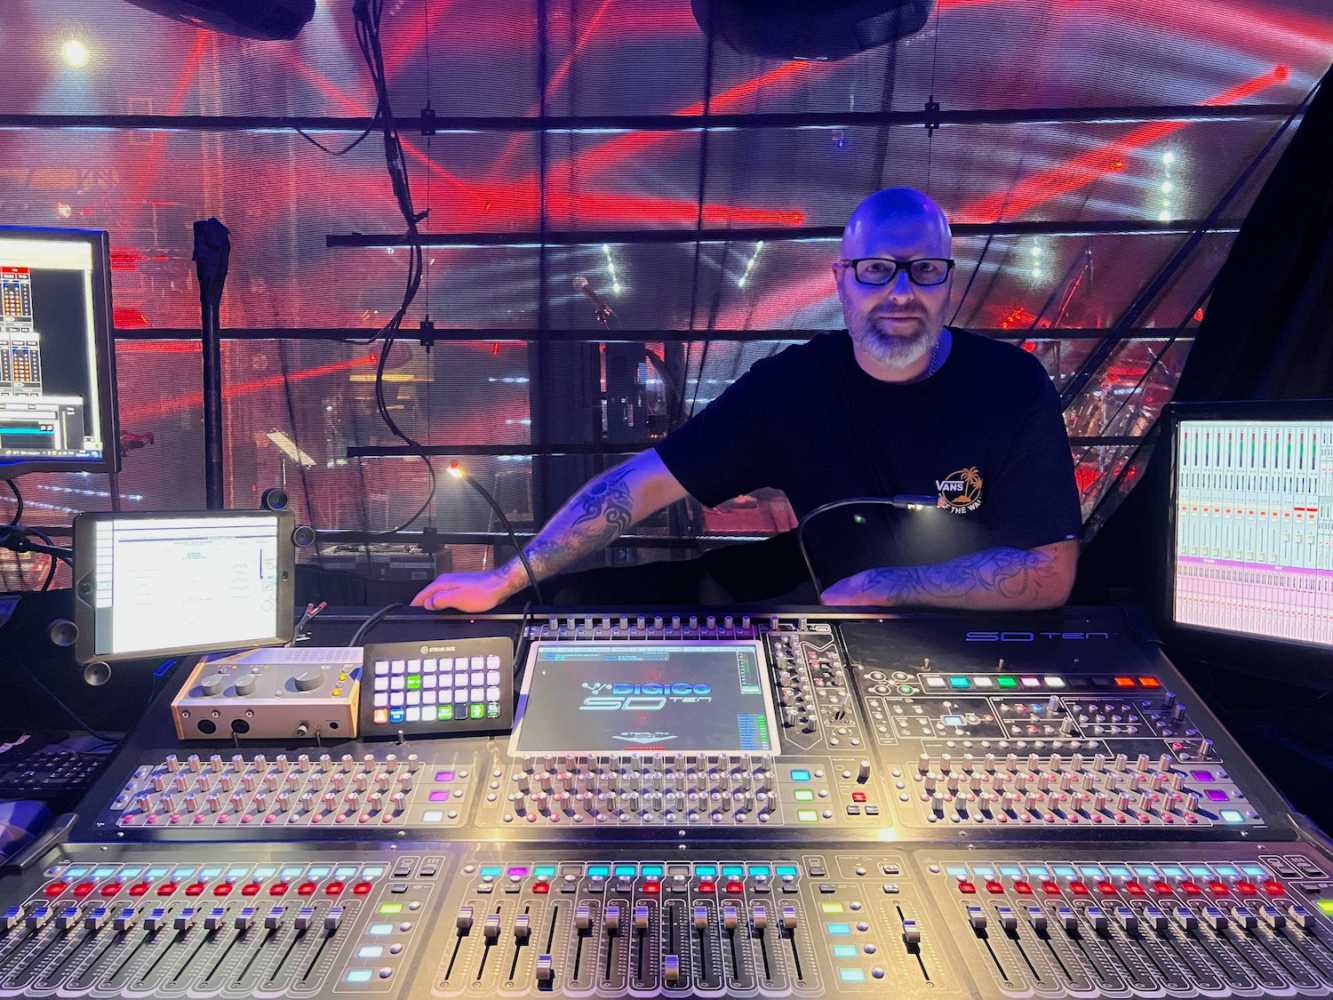 Hugo Angers - TV mixer and sound engineer and co-owner of Quebec-based Euphonie Sonorisation